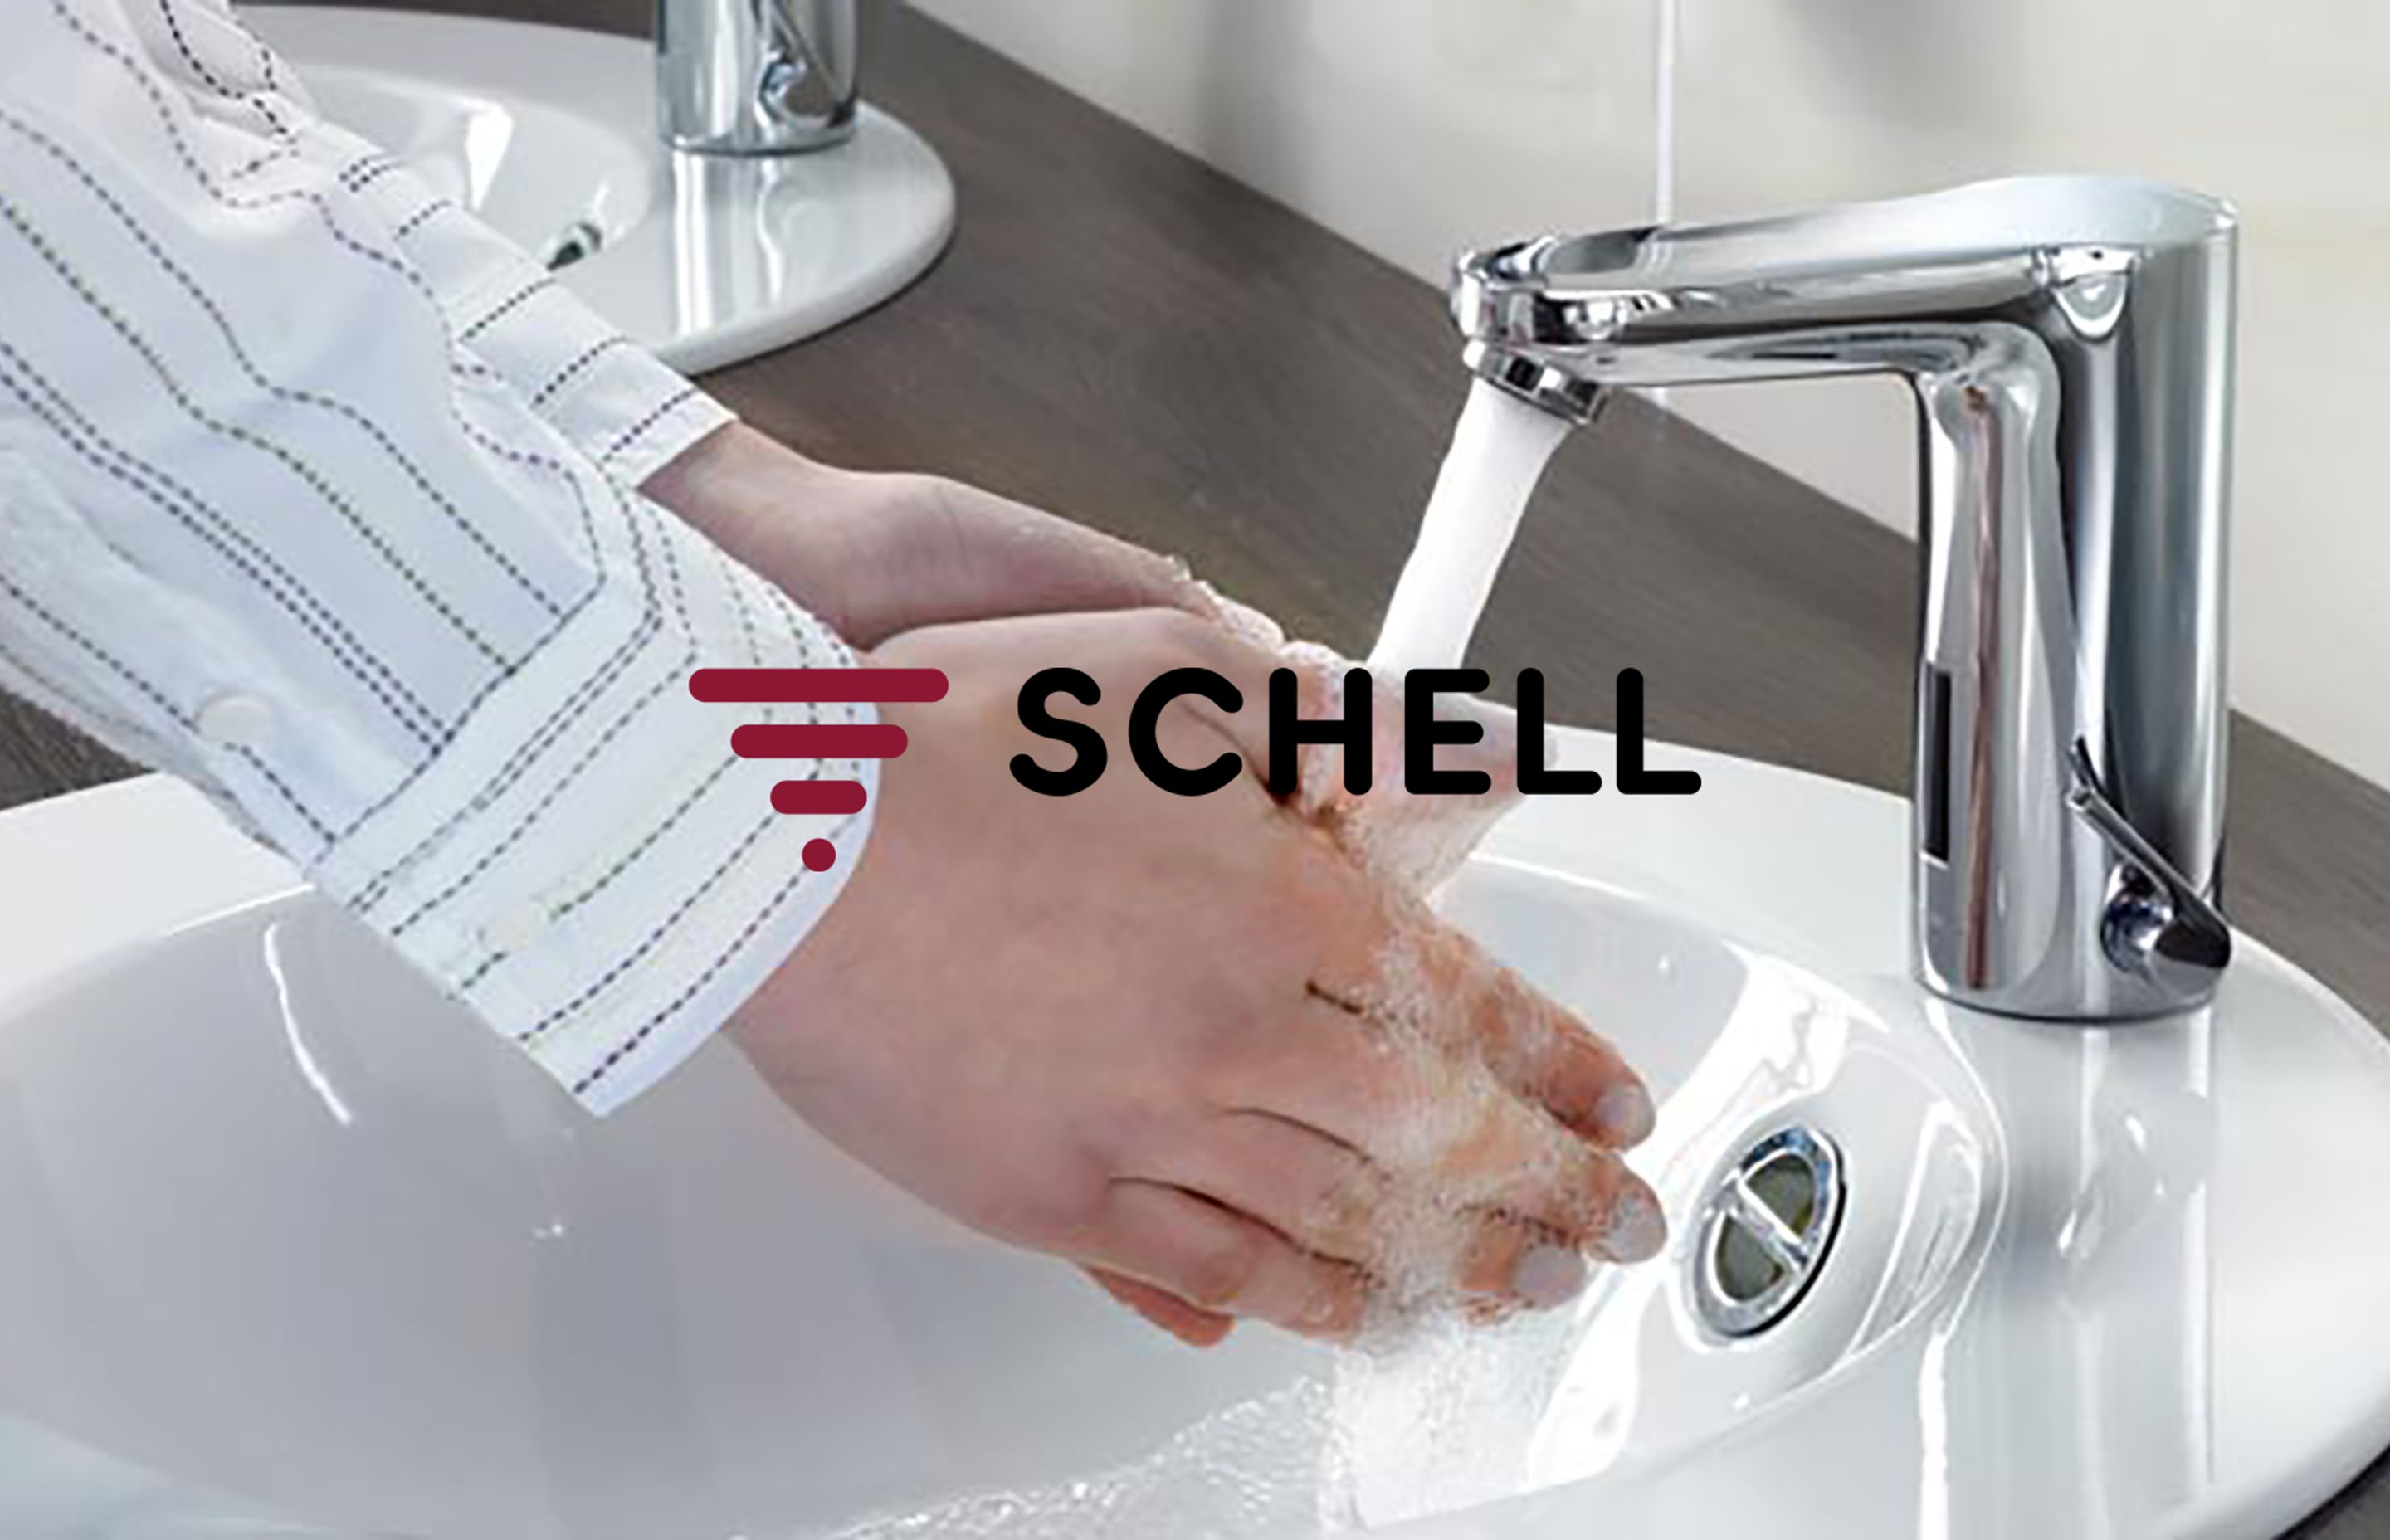 Germany: Providing the most innovative brands for your bathroom